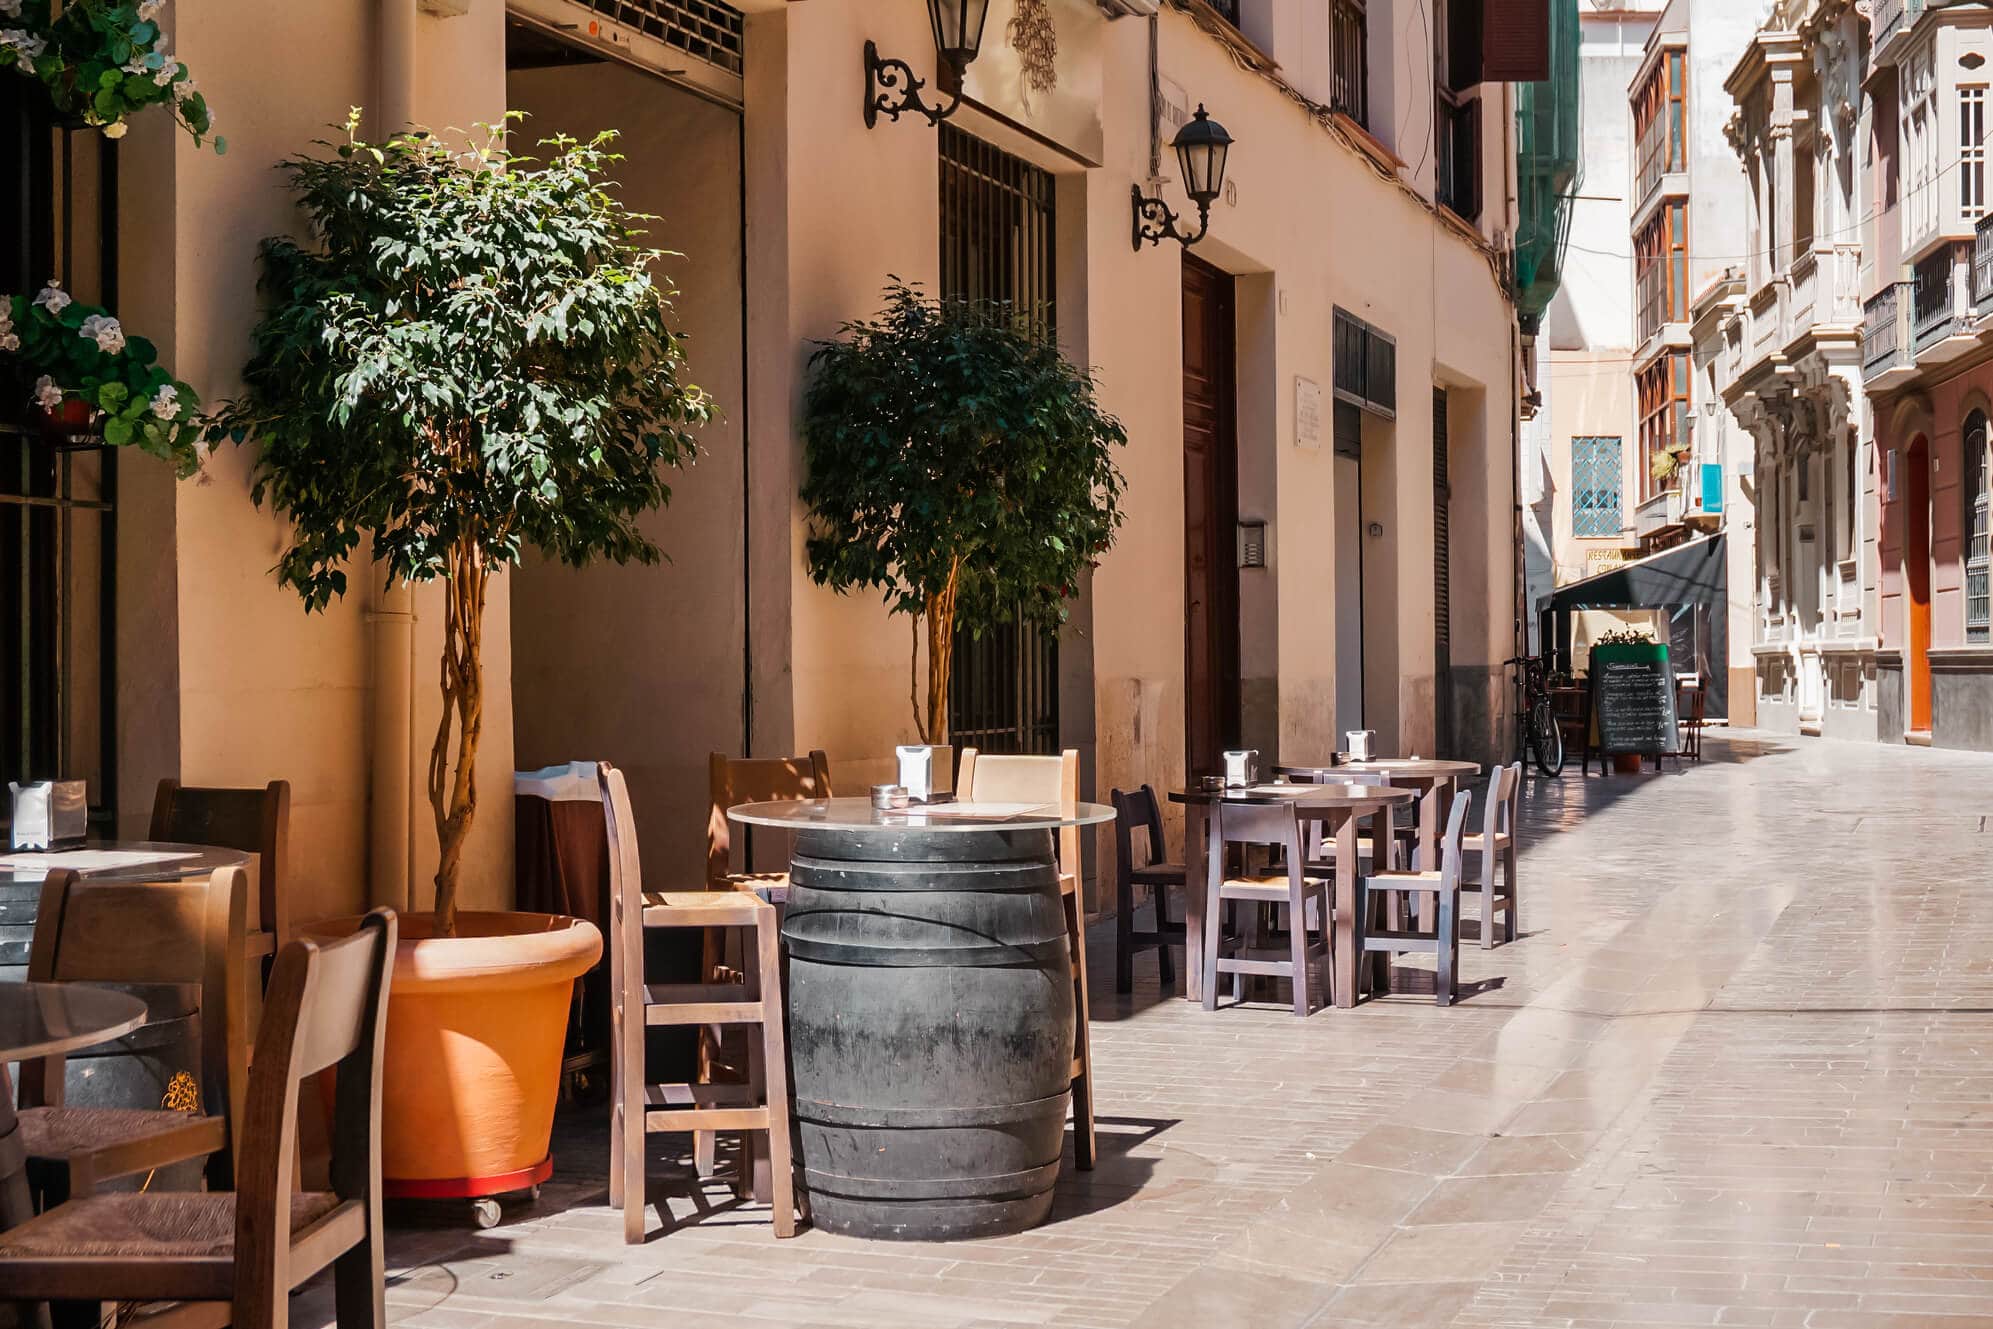 A typical taverna in a beige buidling with a few tables and chairs, an old barrel and two potted trees outside on the pedestrian street, in Malaga Old Town.